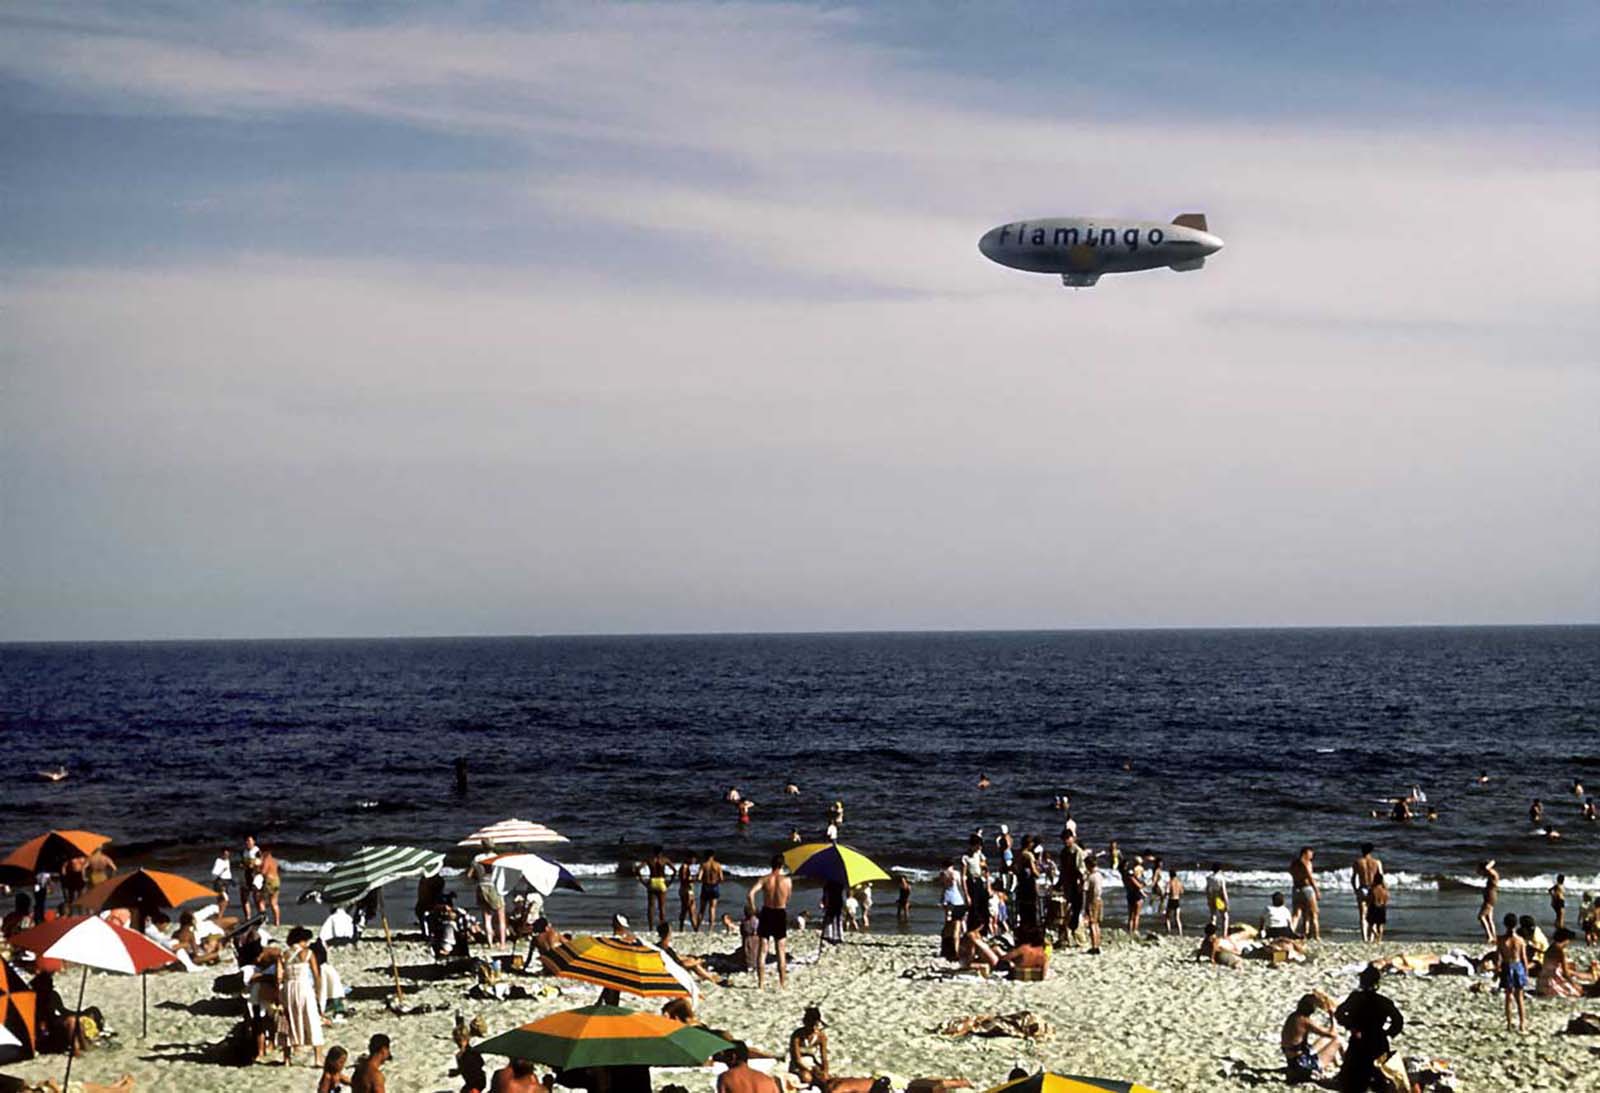 Sunbathers and swimmers on the beach while a blimp with the word Flamingo on the side glides above.